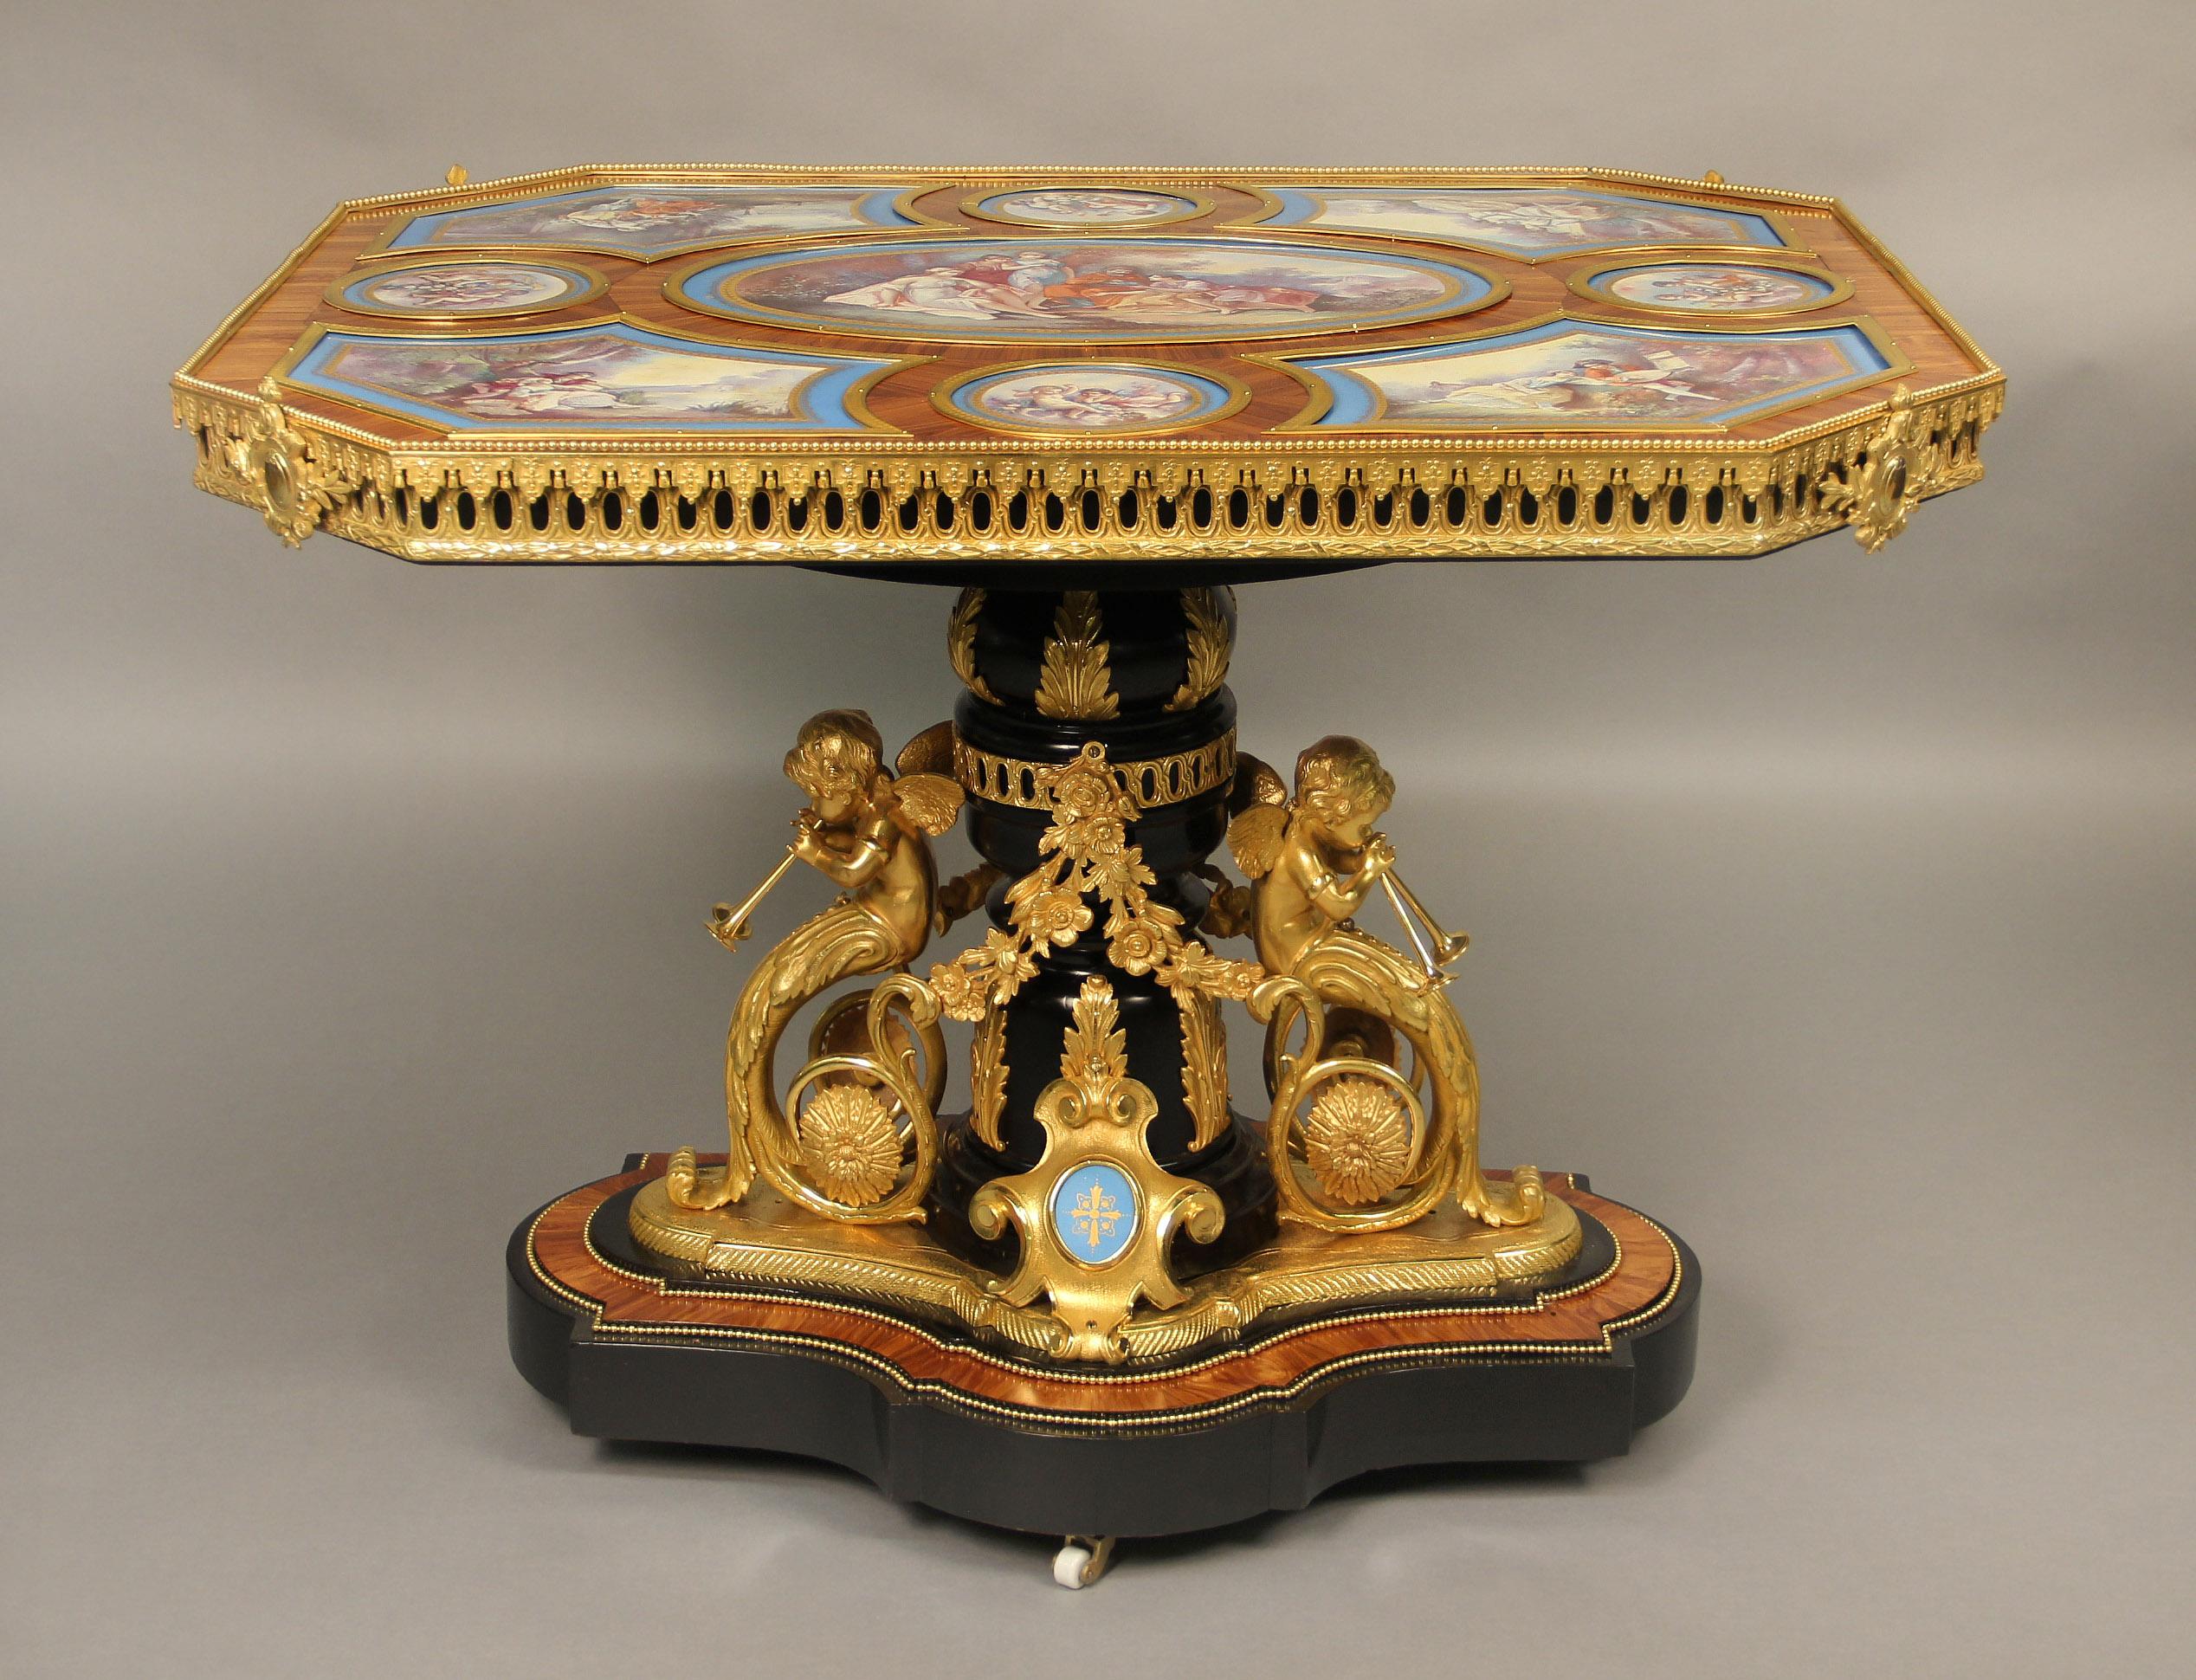 An Excellent Late 19th century Gilt-Bronze and Sèvres Style Porcelain Mounted Kingwood and Ebonized Wood Center Table.

The rectangular shaped table with nine individual turquoise painted porcelain plaques, the large oval center plaque depicting a